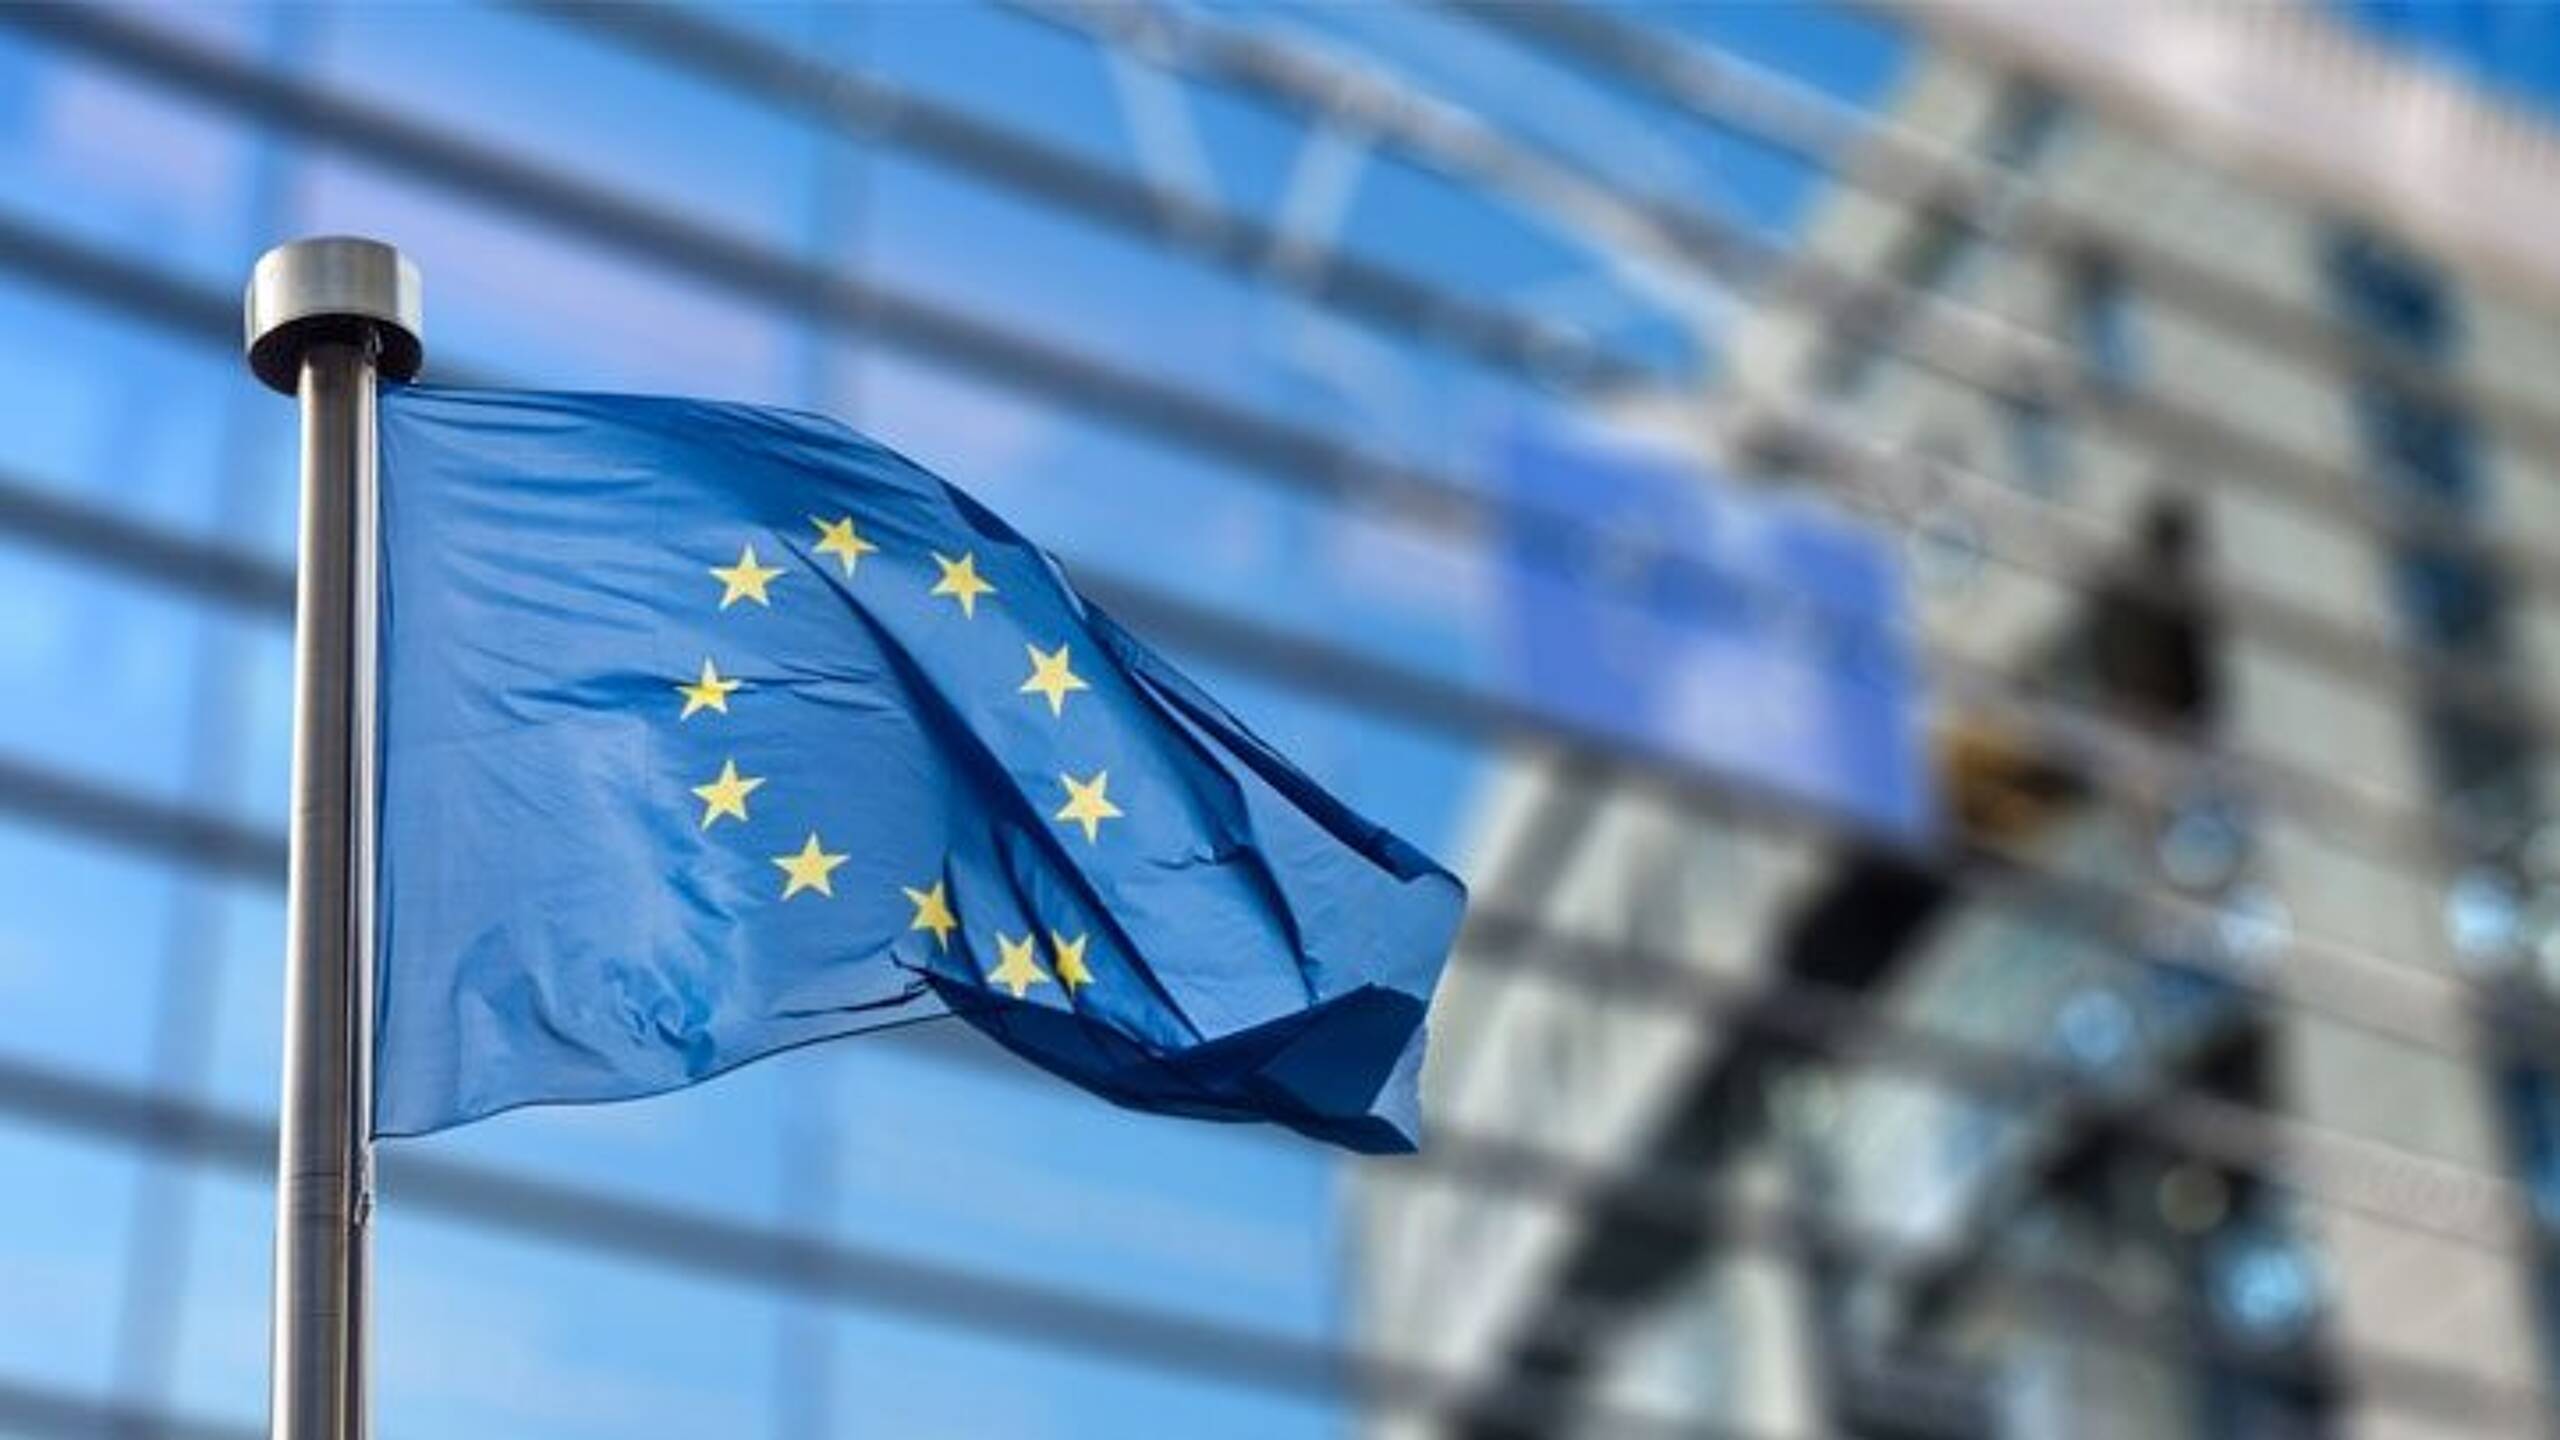 Net-Zero Industry Act: European Commission unveils new vision for clean energy revolution